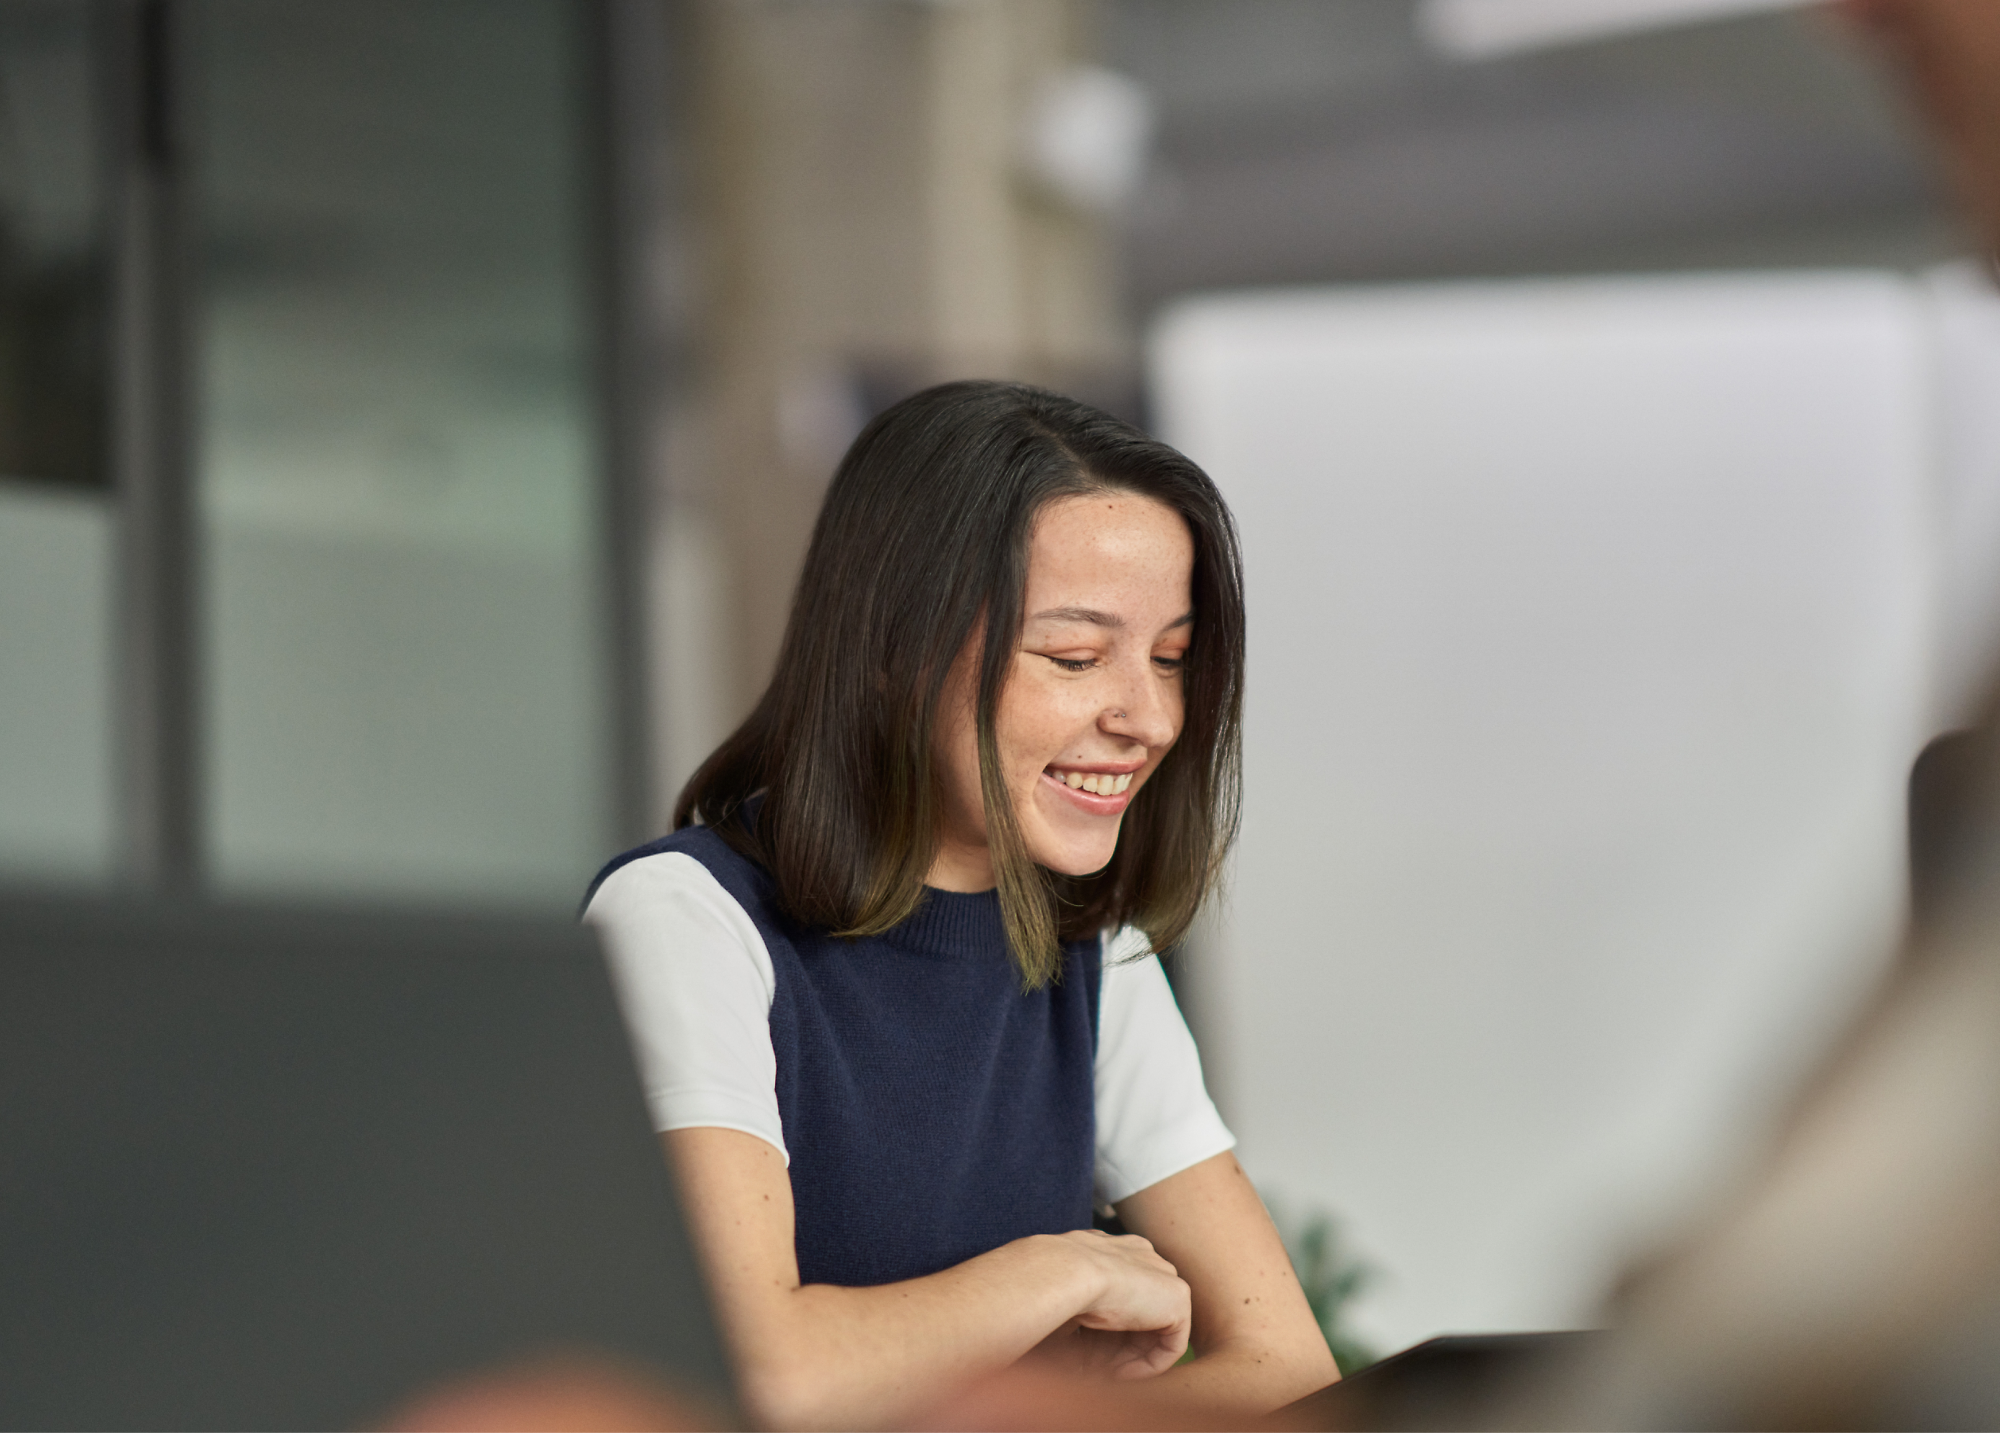 Woman smiling during a meeting in an office environment.